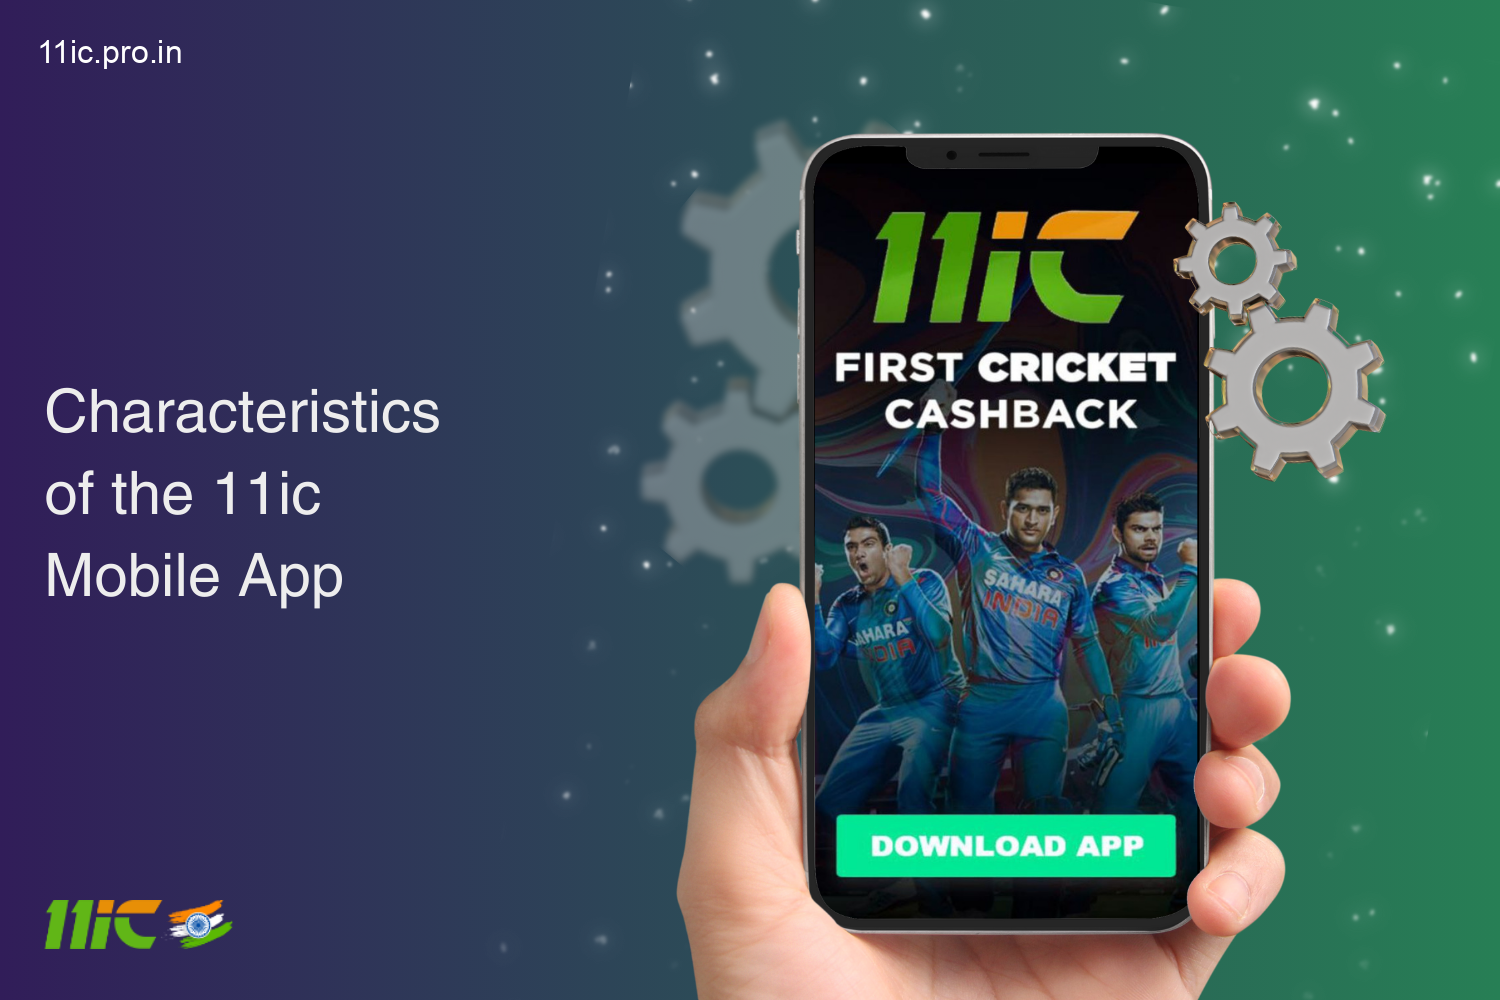 The 11ic mobile app for Indian users gives full functionality and ease of use